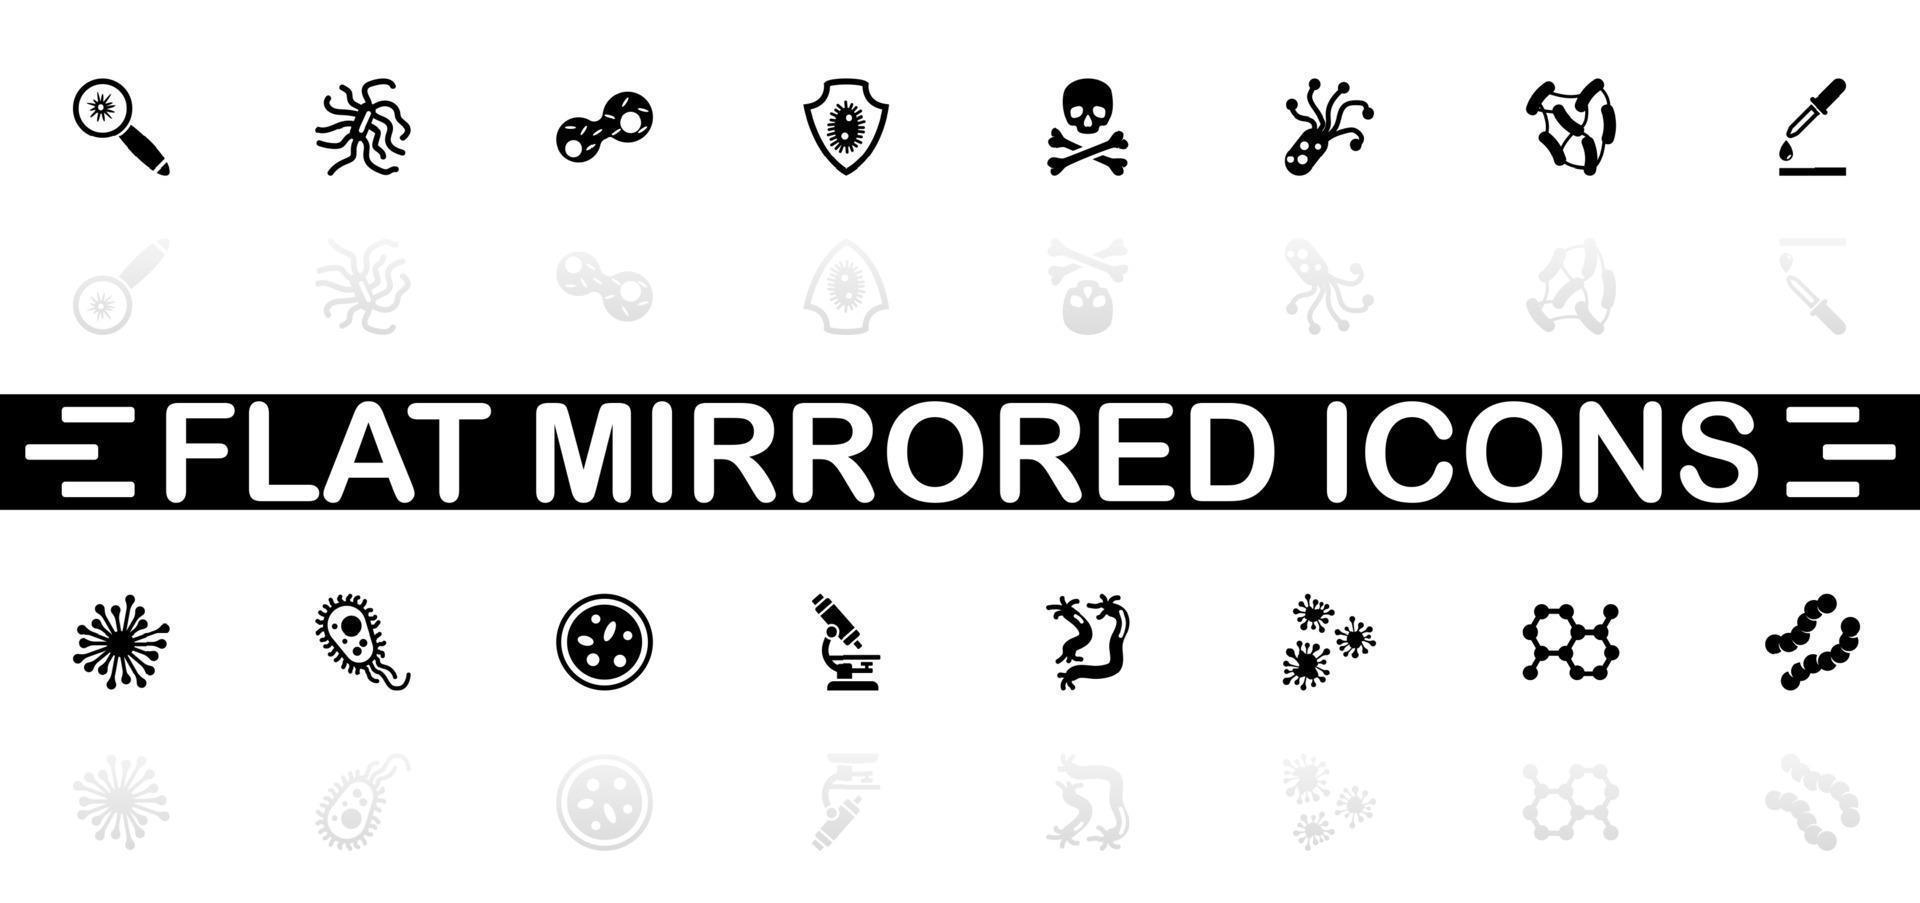 Bacteria icons - Black symbol on white background. Simple illustration. Flat Vector Icon. Mirror Reflection Shadow. Can be used in logo, web, mobile and UI UX project.